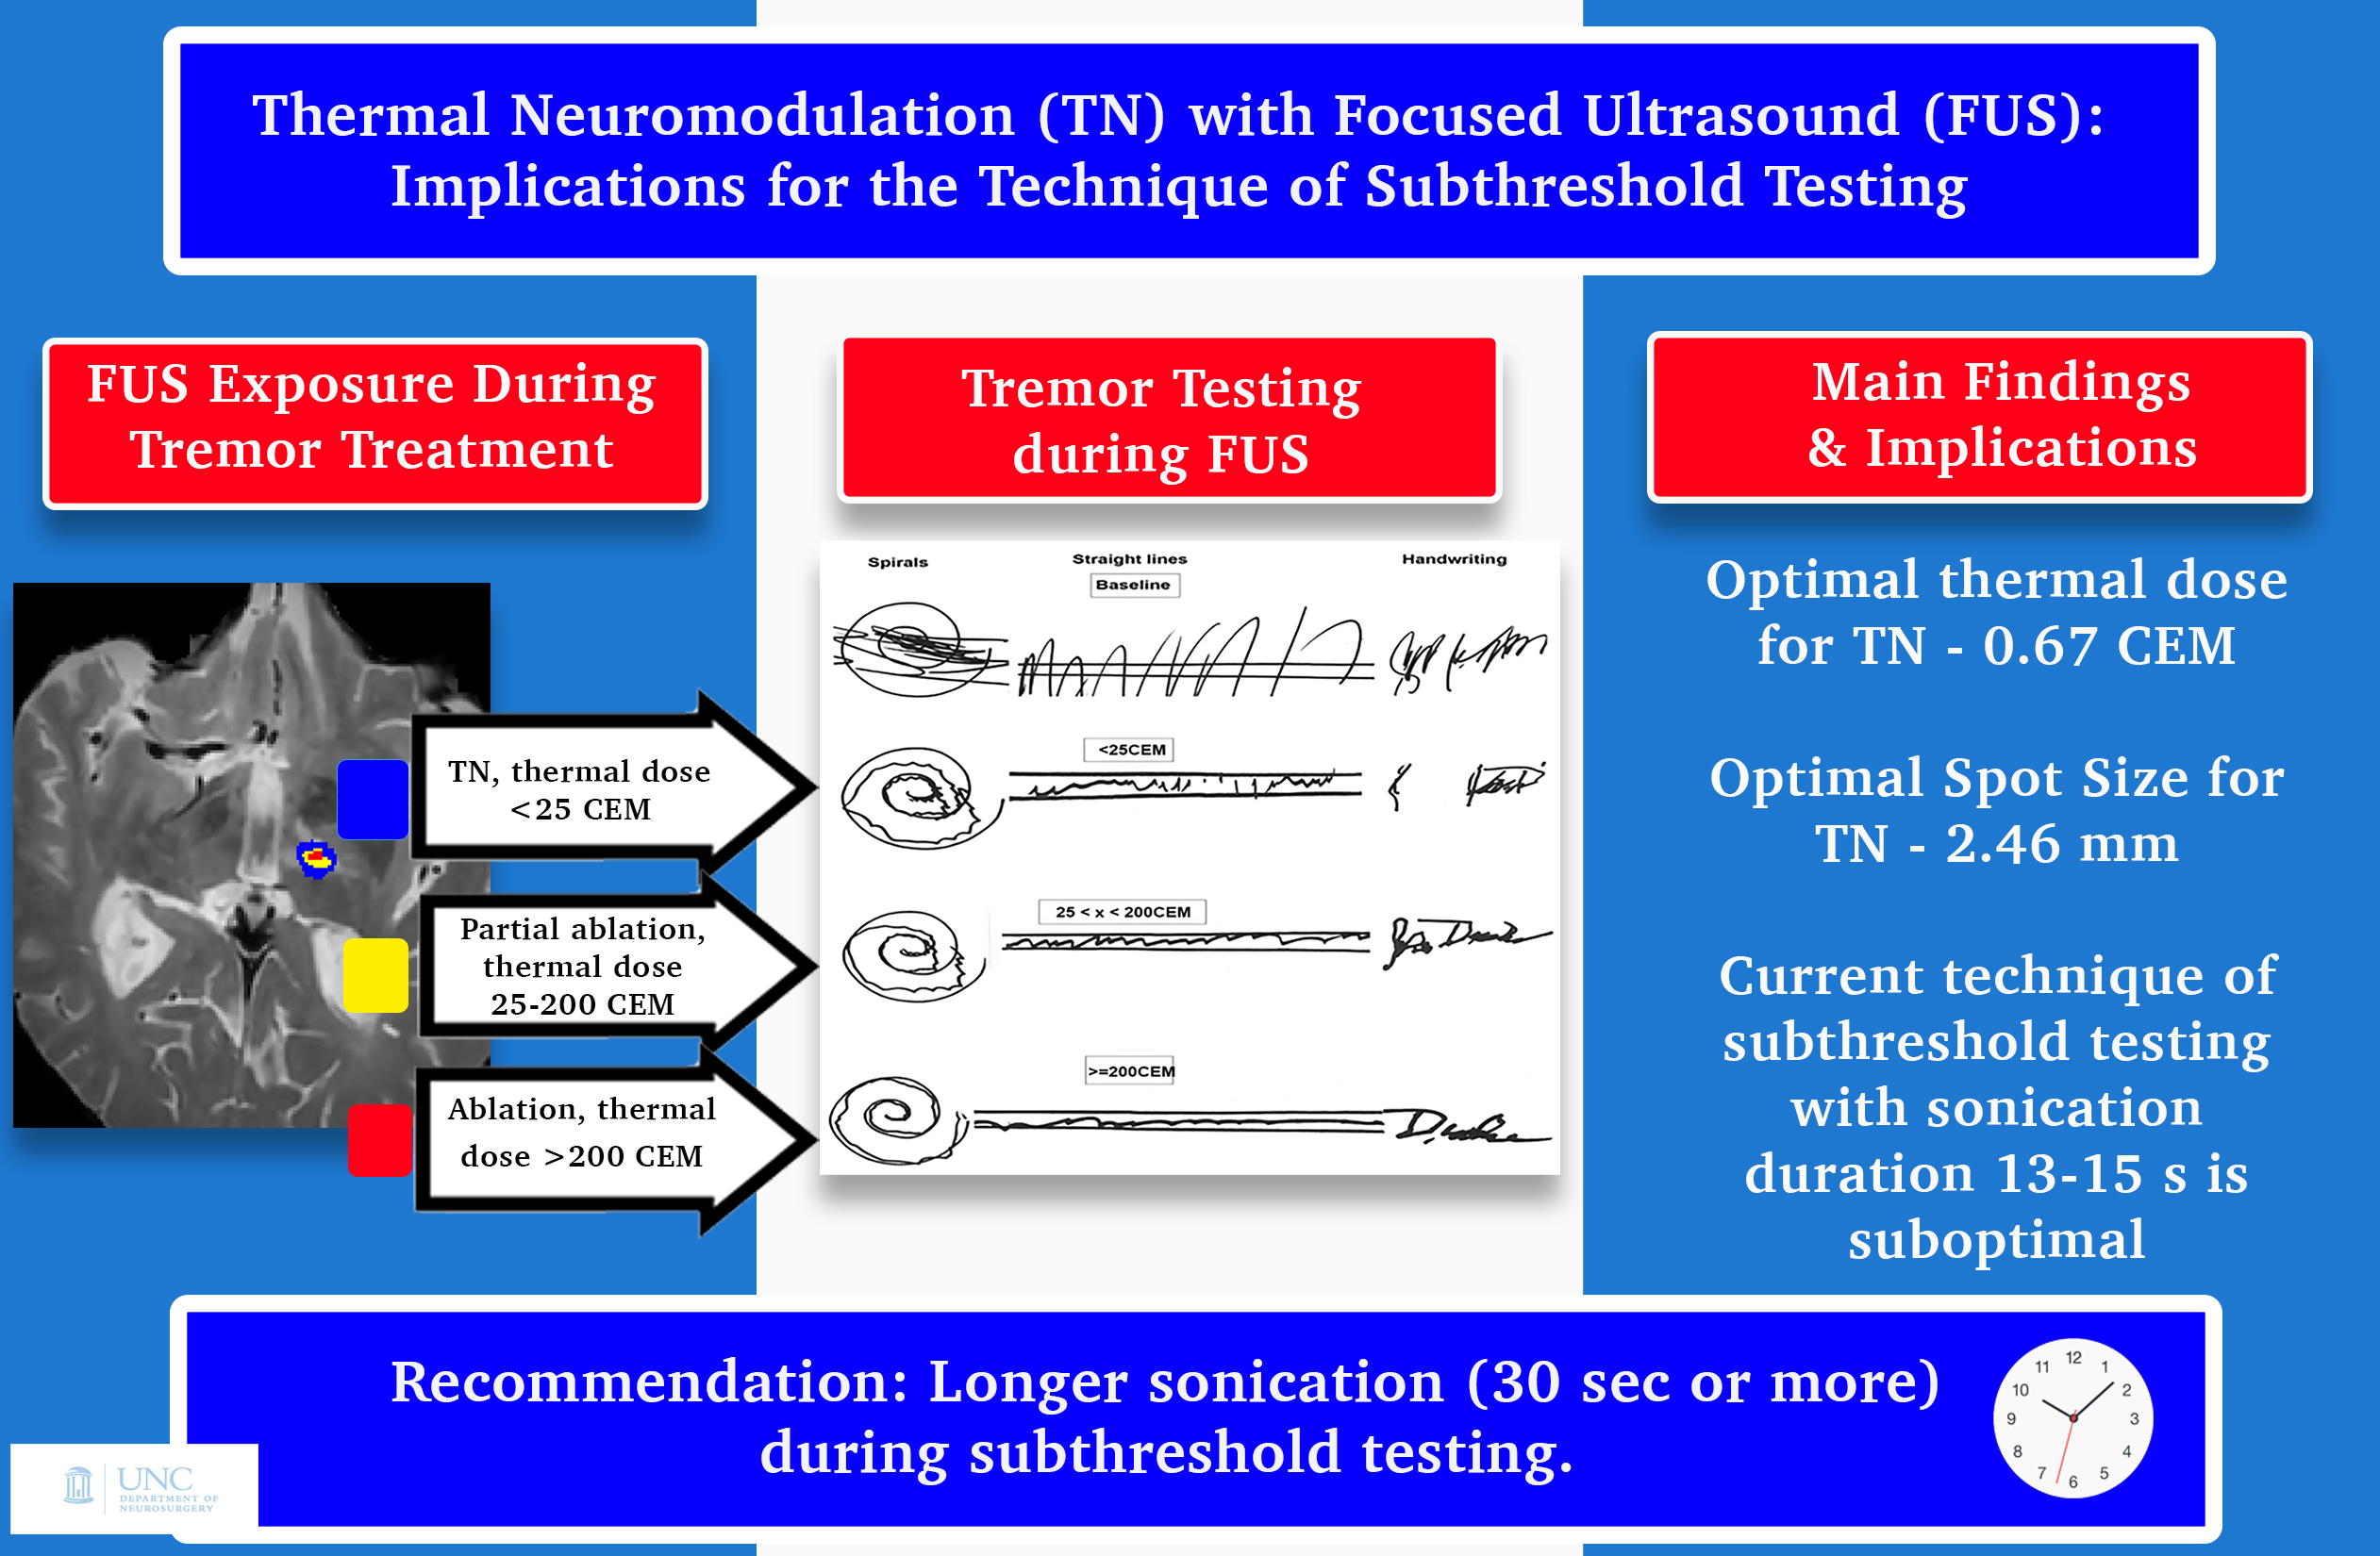 Visual Abstract - Thermal Neuromodulation with Focused Ultrasound: Implications for the Technique of Subthreshold Testing